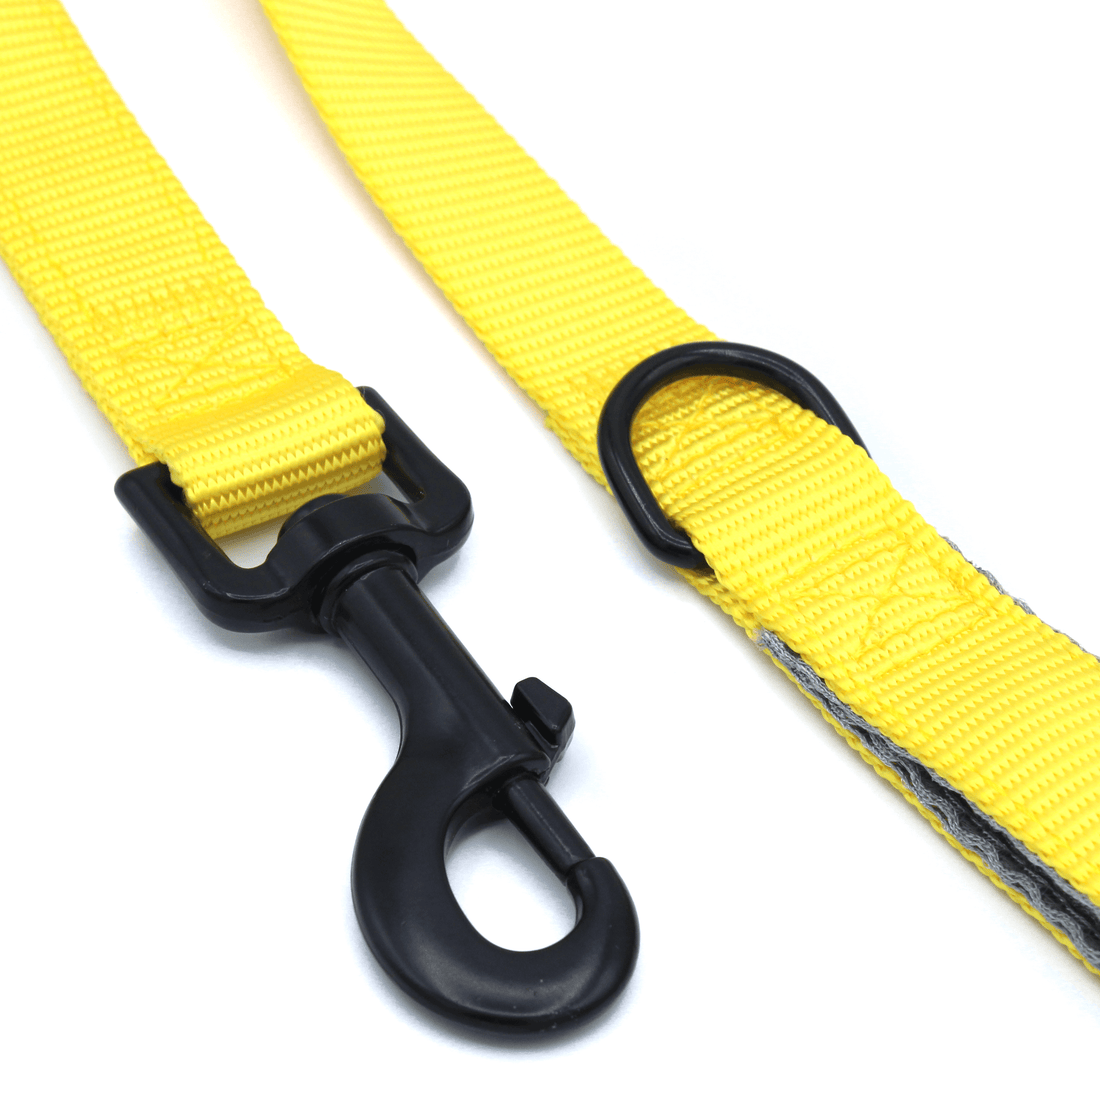 a bright yellow leash with black clasp and d-ring